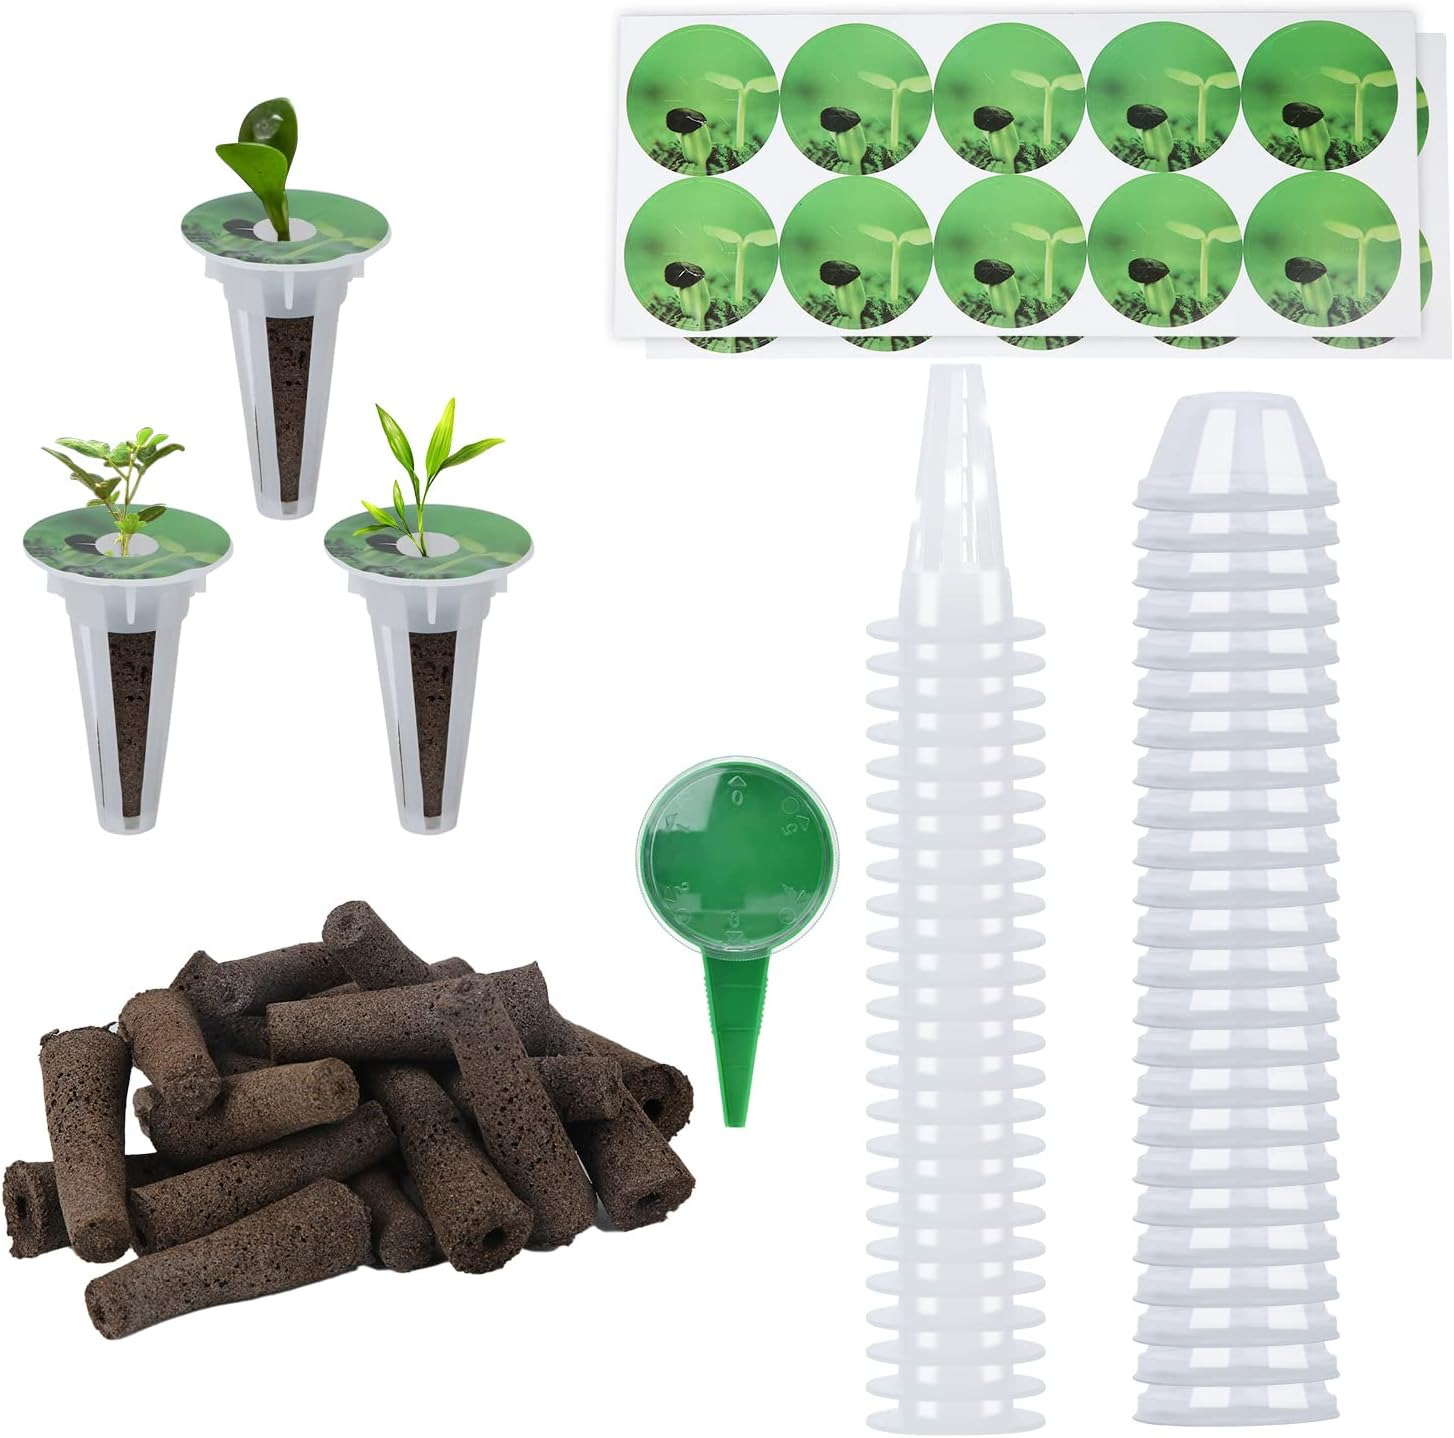 24 Sets Seed Pod Kit for Aerogarden, Grow Plants for Indoors for Hydroponic Grow